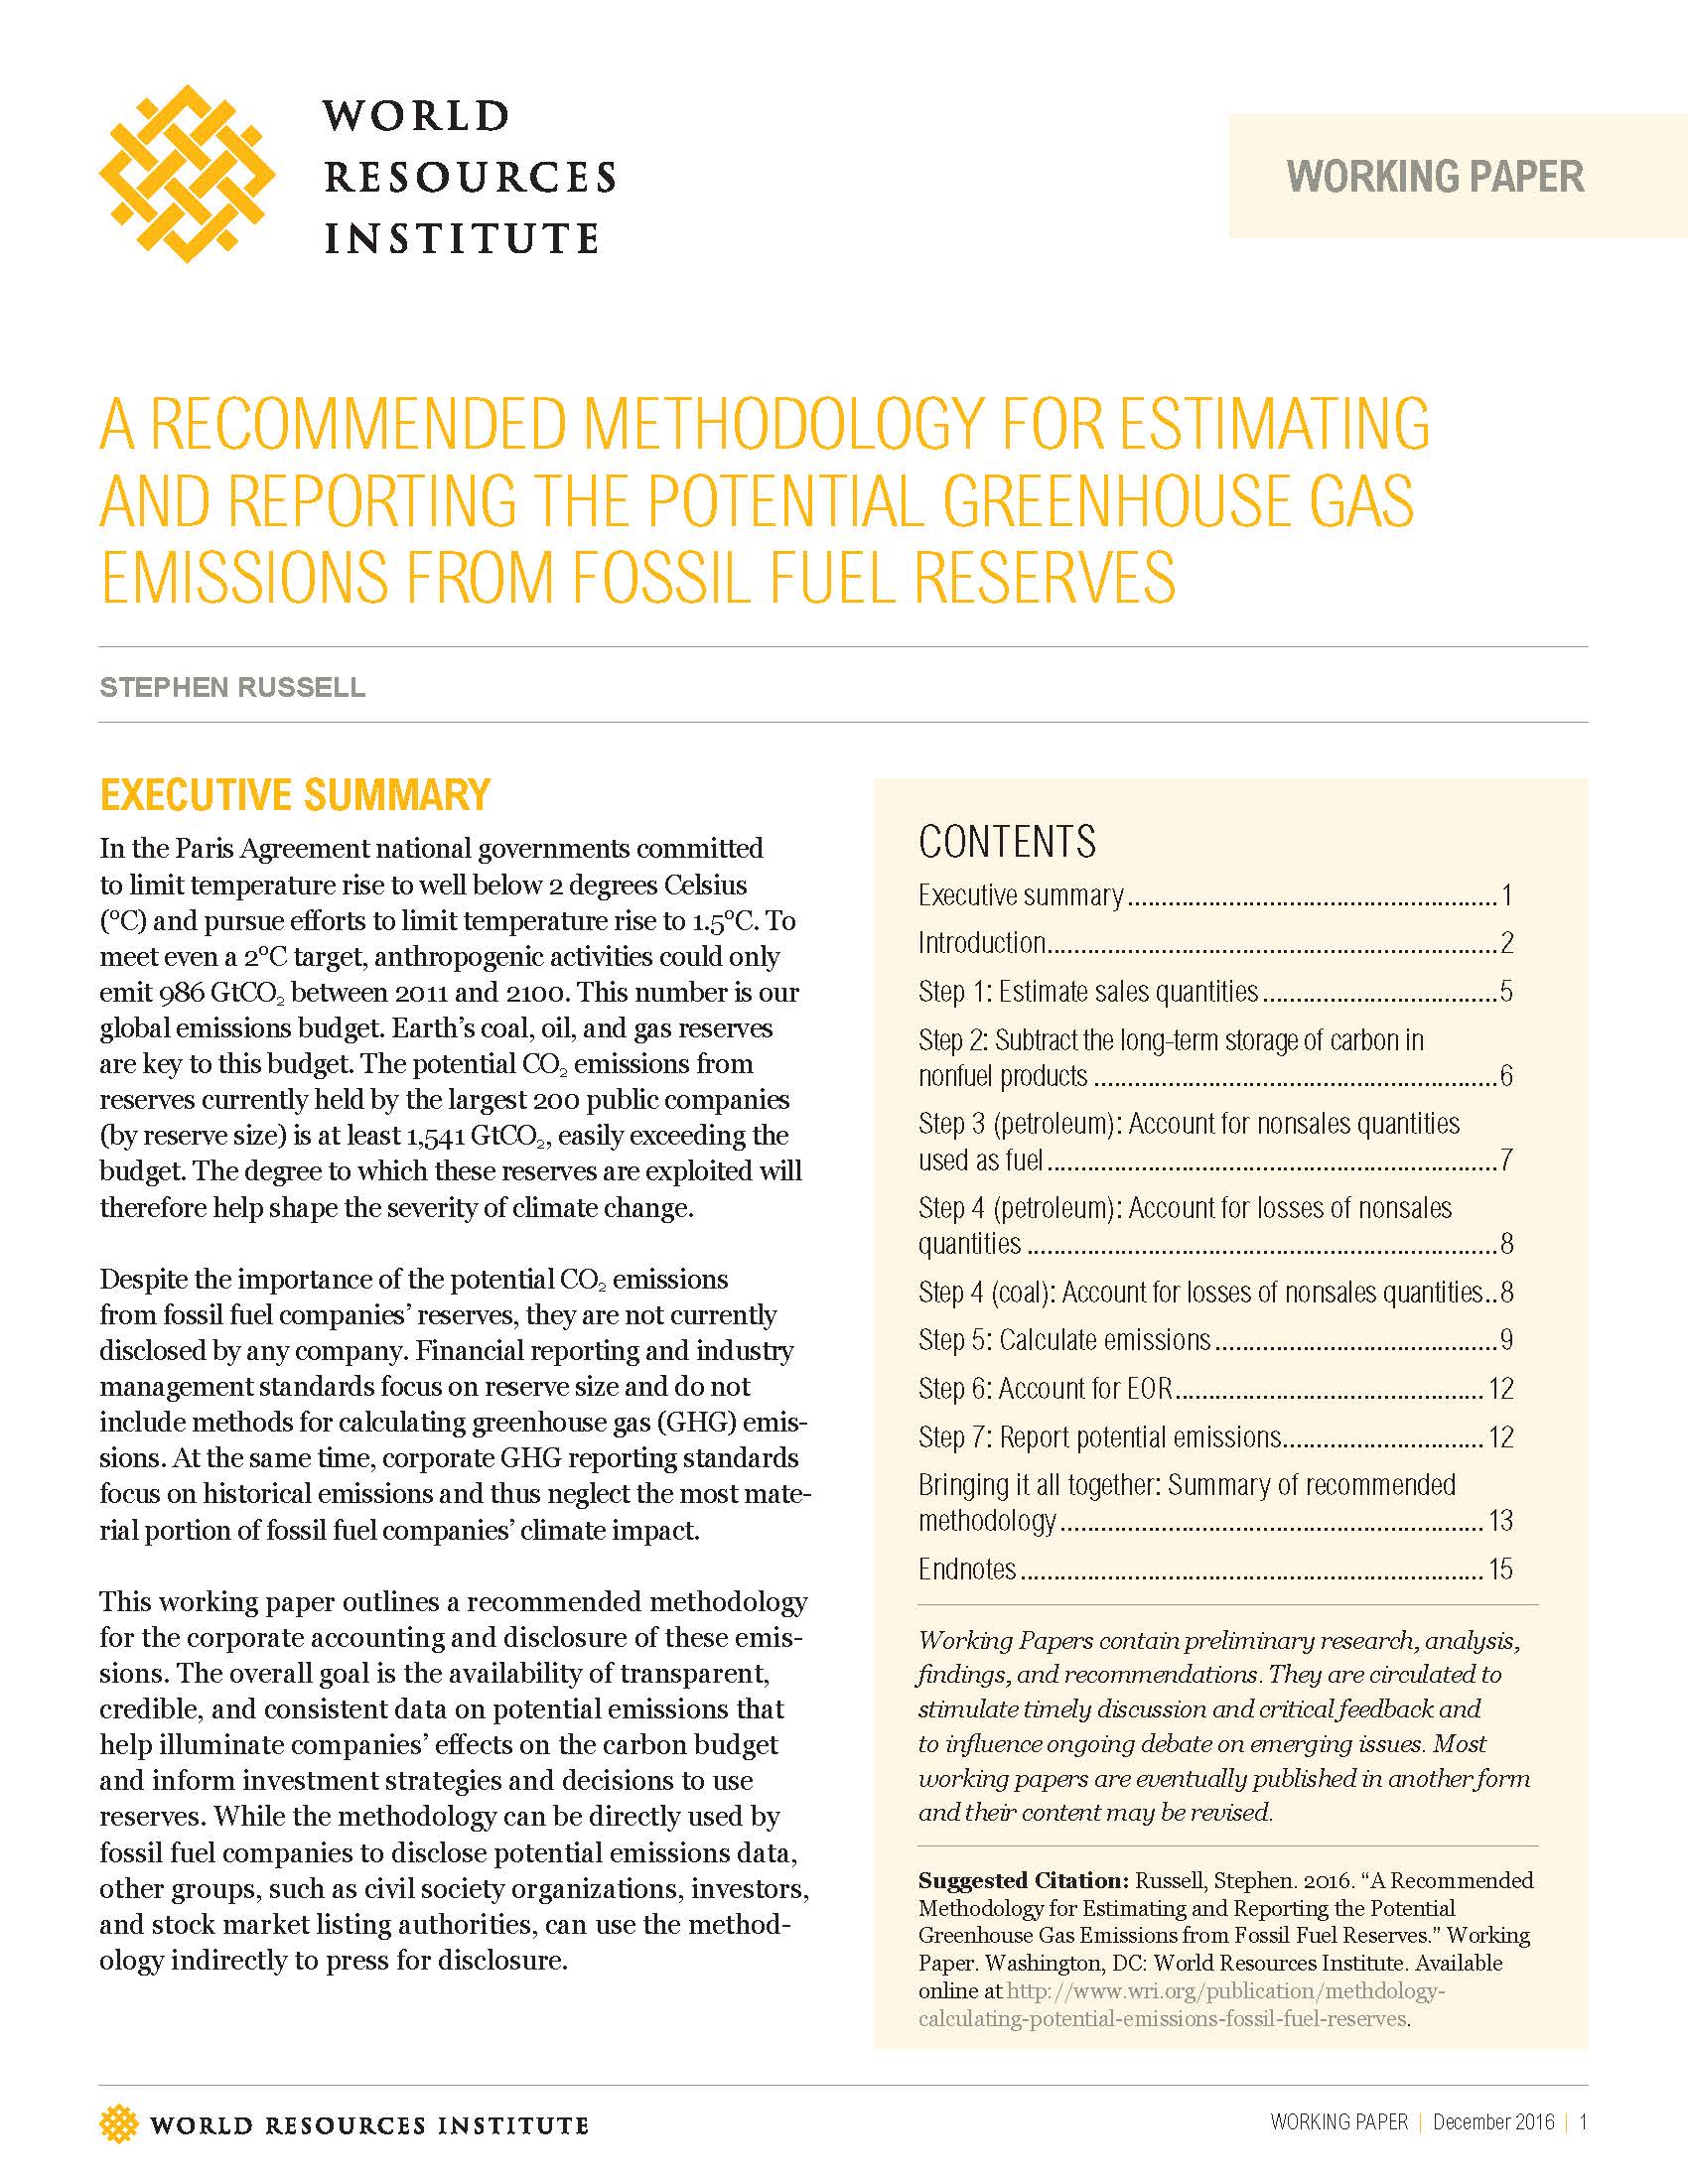 The first-ever comprehensive global guidance for measuring and reporting the potential greenhouse gas (GHG) emissions from the fossil fuel reserves held by oil, coal and gas companies.